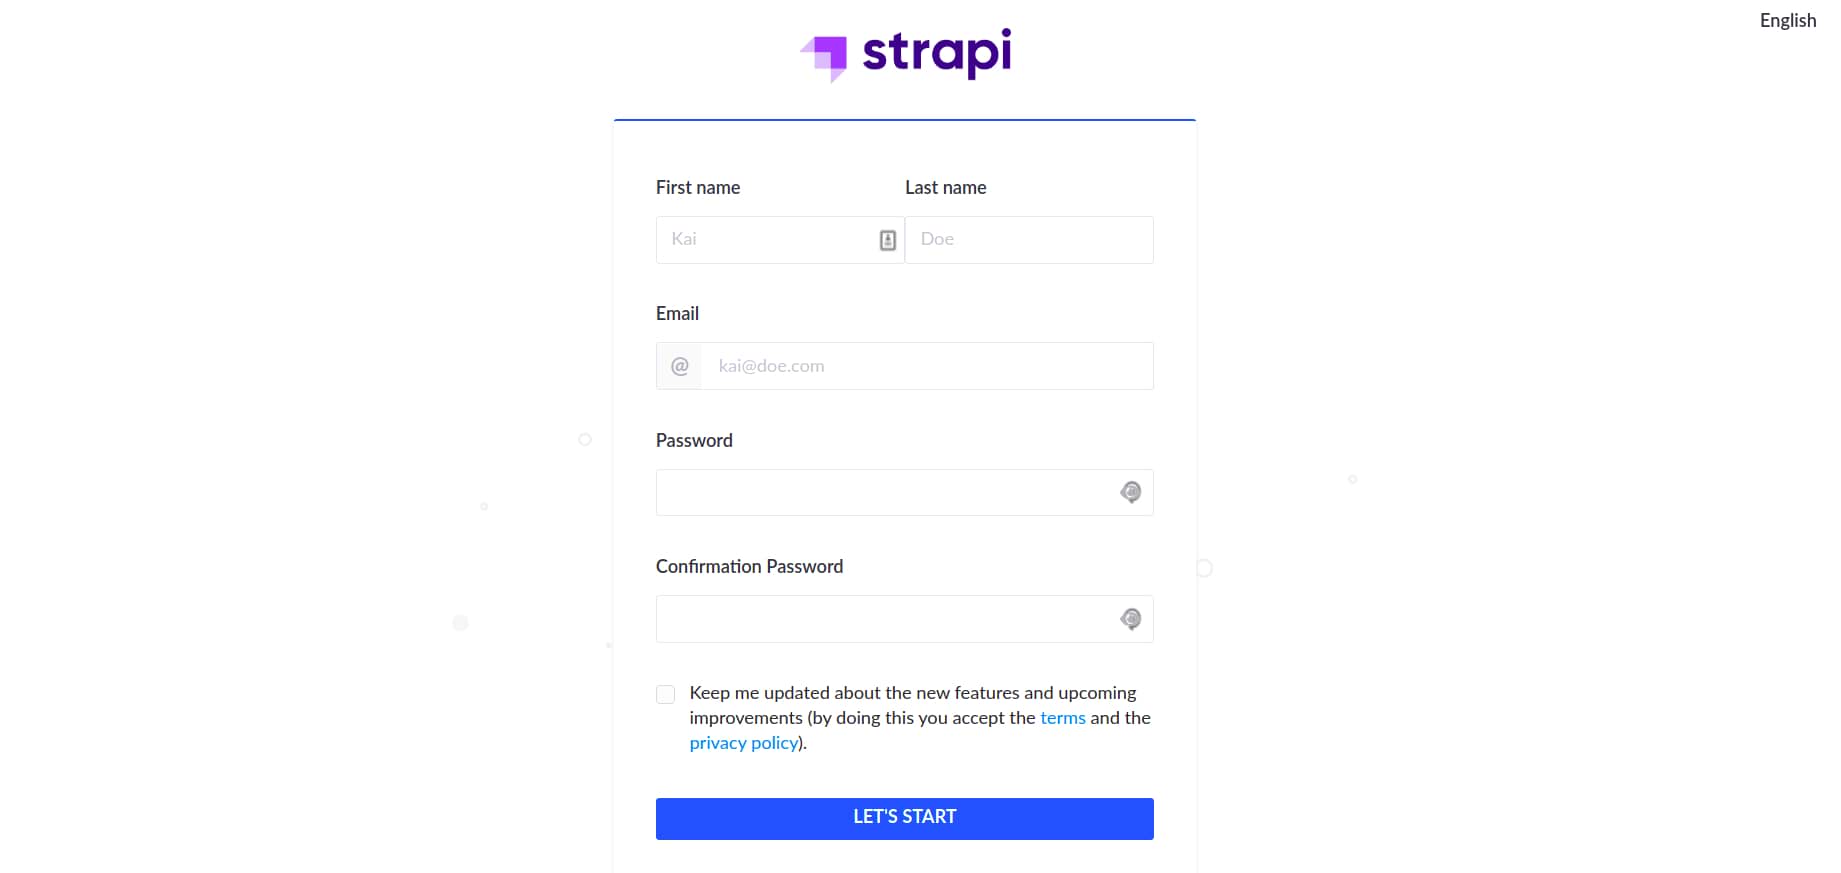 Strapi first launch